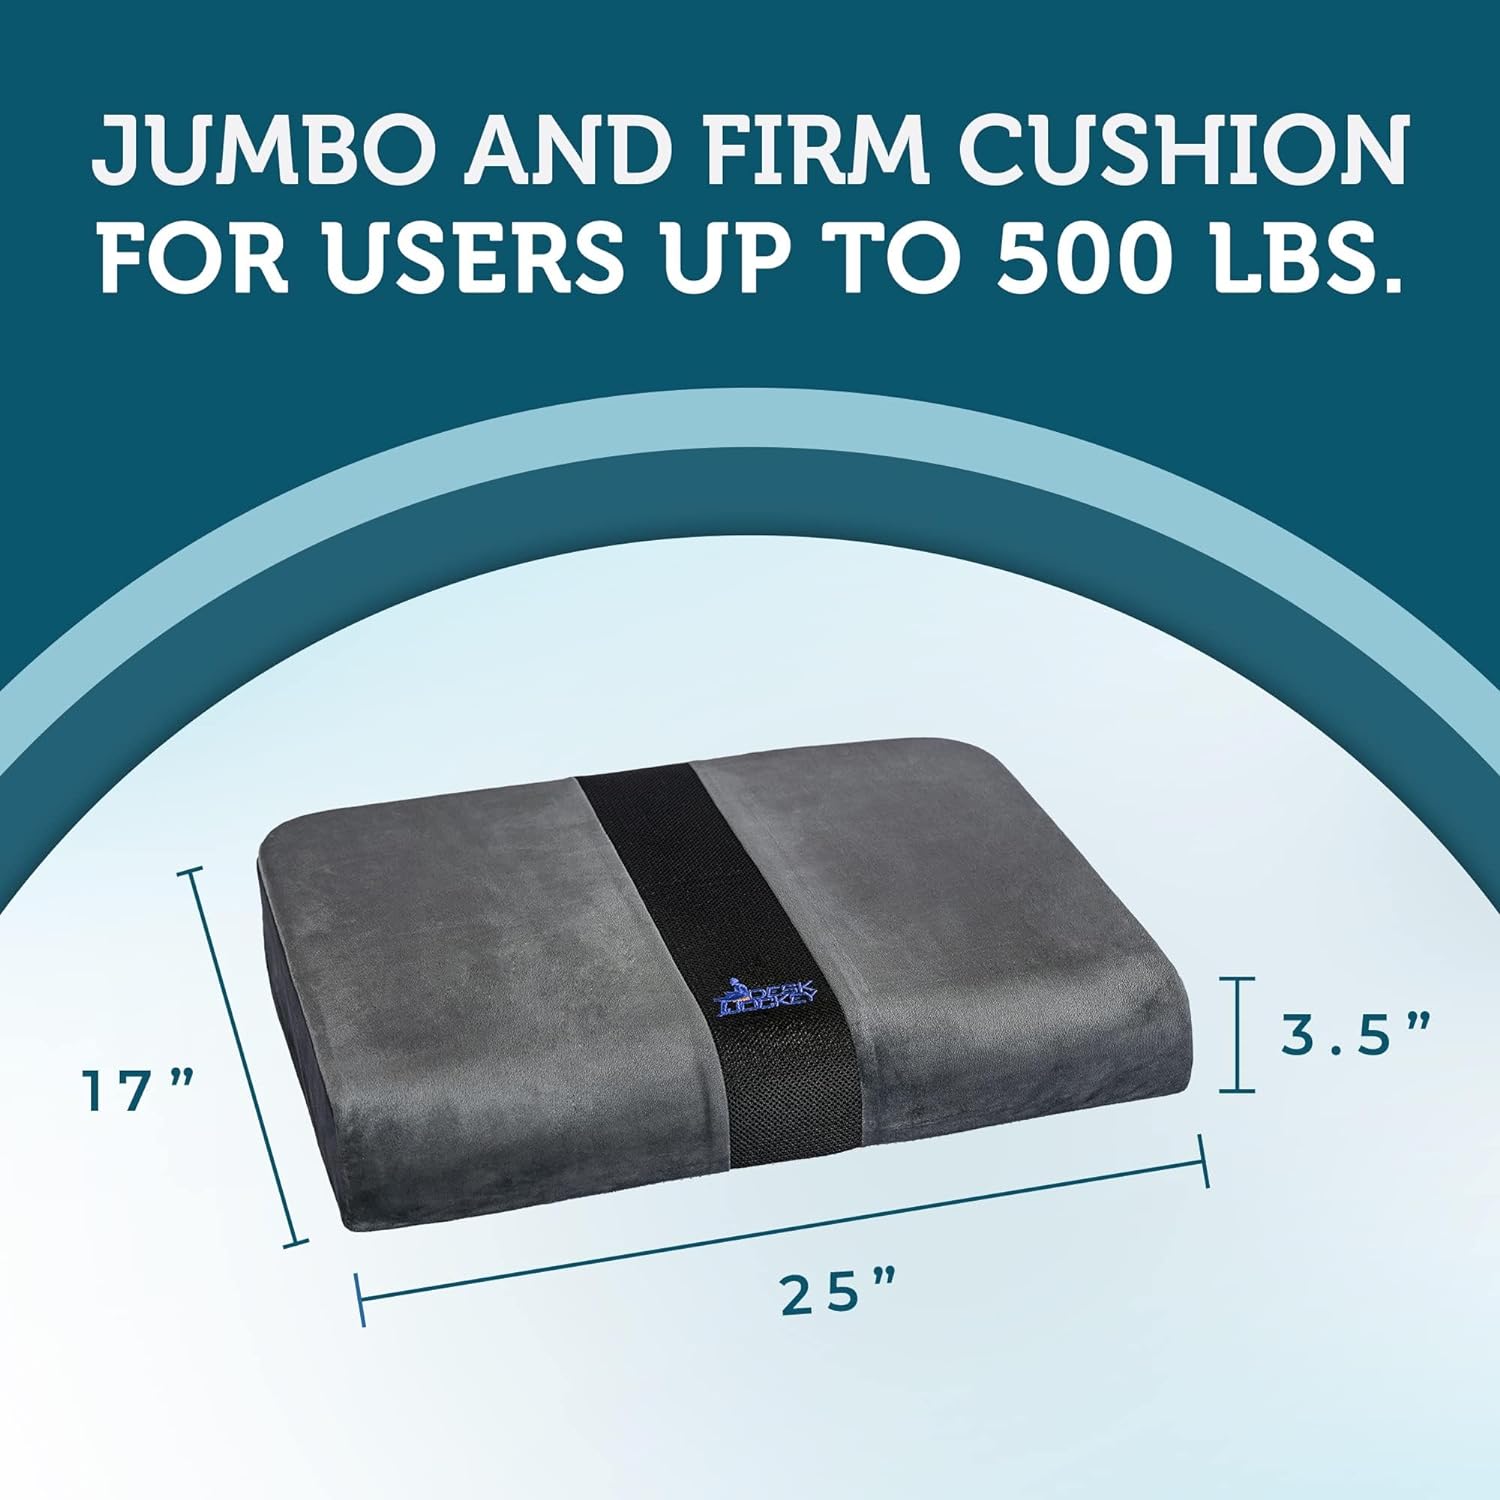 Extra Wide Seat Cushion for Wheelchairs & Office Chairs - Jumbo and Wheelchair Cushion for Users 300 to 500lbs (25") - Proprietary Blended Memory Foam Relieves Sciatica, Tailbone and Back Pain